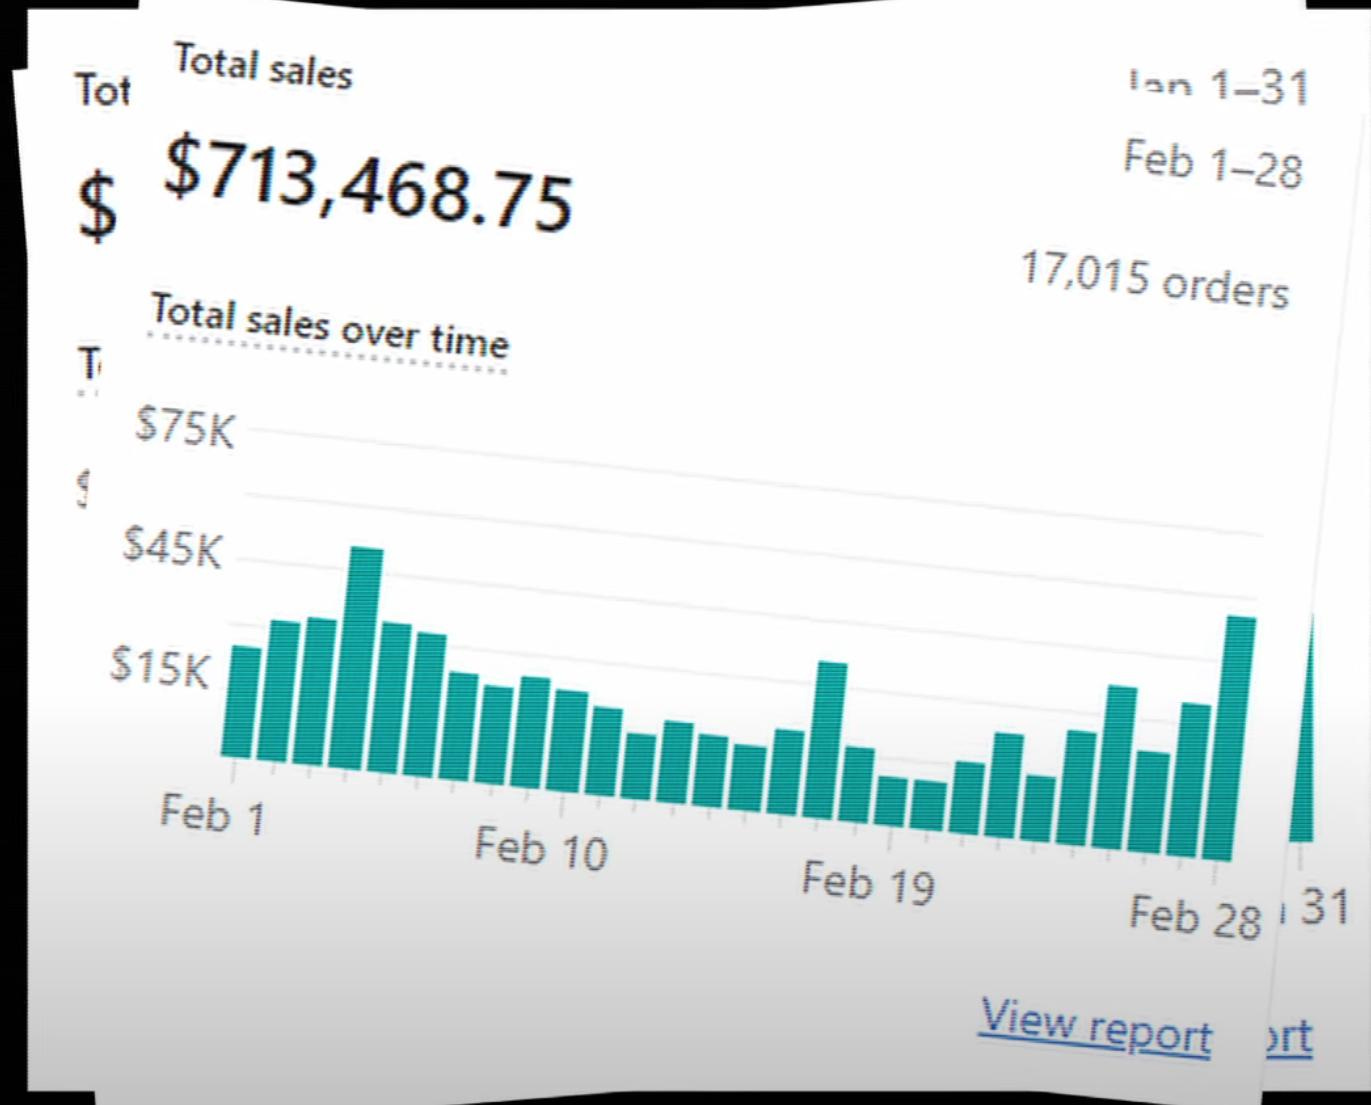 May be an image of money and text that says "Total sales Tot $ $713,468.75 Ian 1-31 Feb 1-28 T Totalsales sales over time $75K 17,015 orders $ $45K $15K Feb 1 Feb 10 Feb19 Feb Feb 28 31 View report ort"